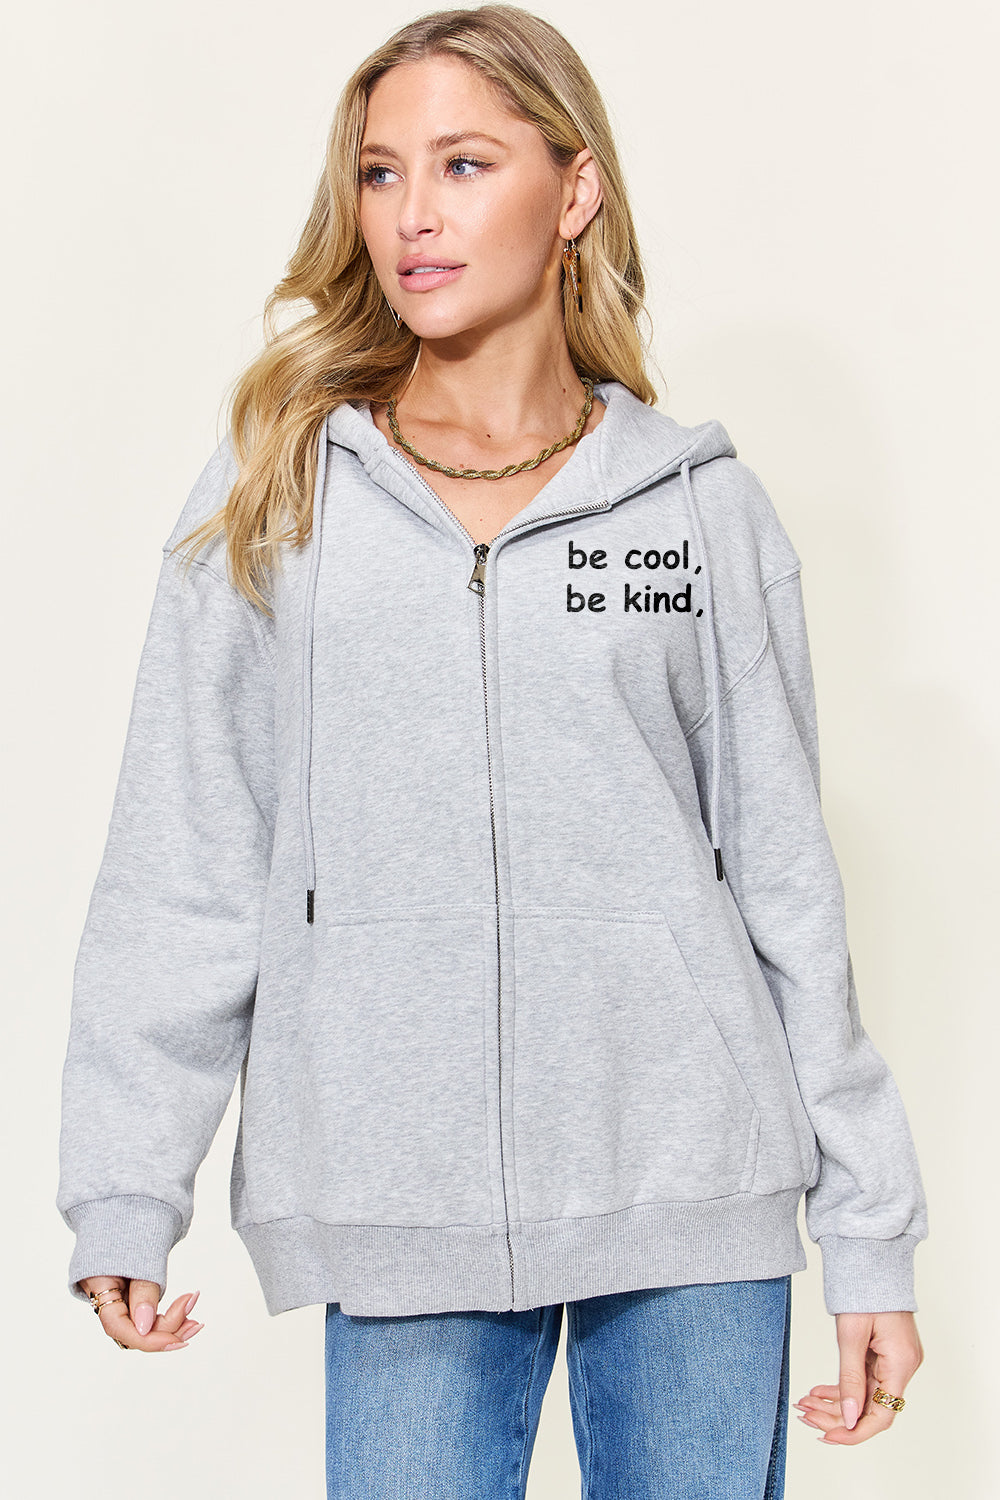 Simply Love Full Size Letter Graphic Zip Up Hoodie Cloudy Blue Sweatshirts & Hoodies JT's Designer Fashion